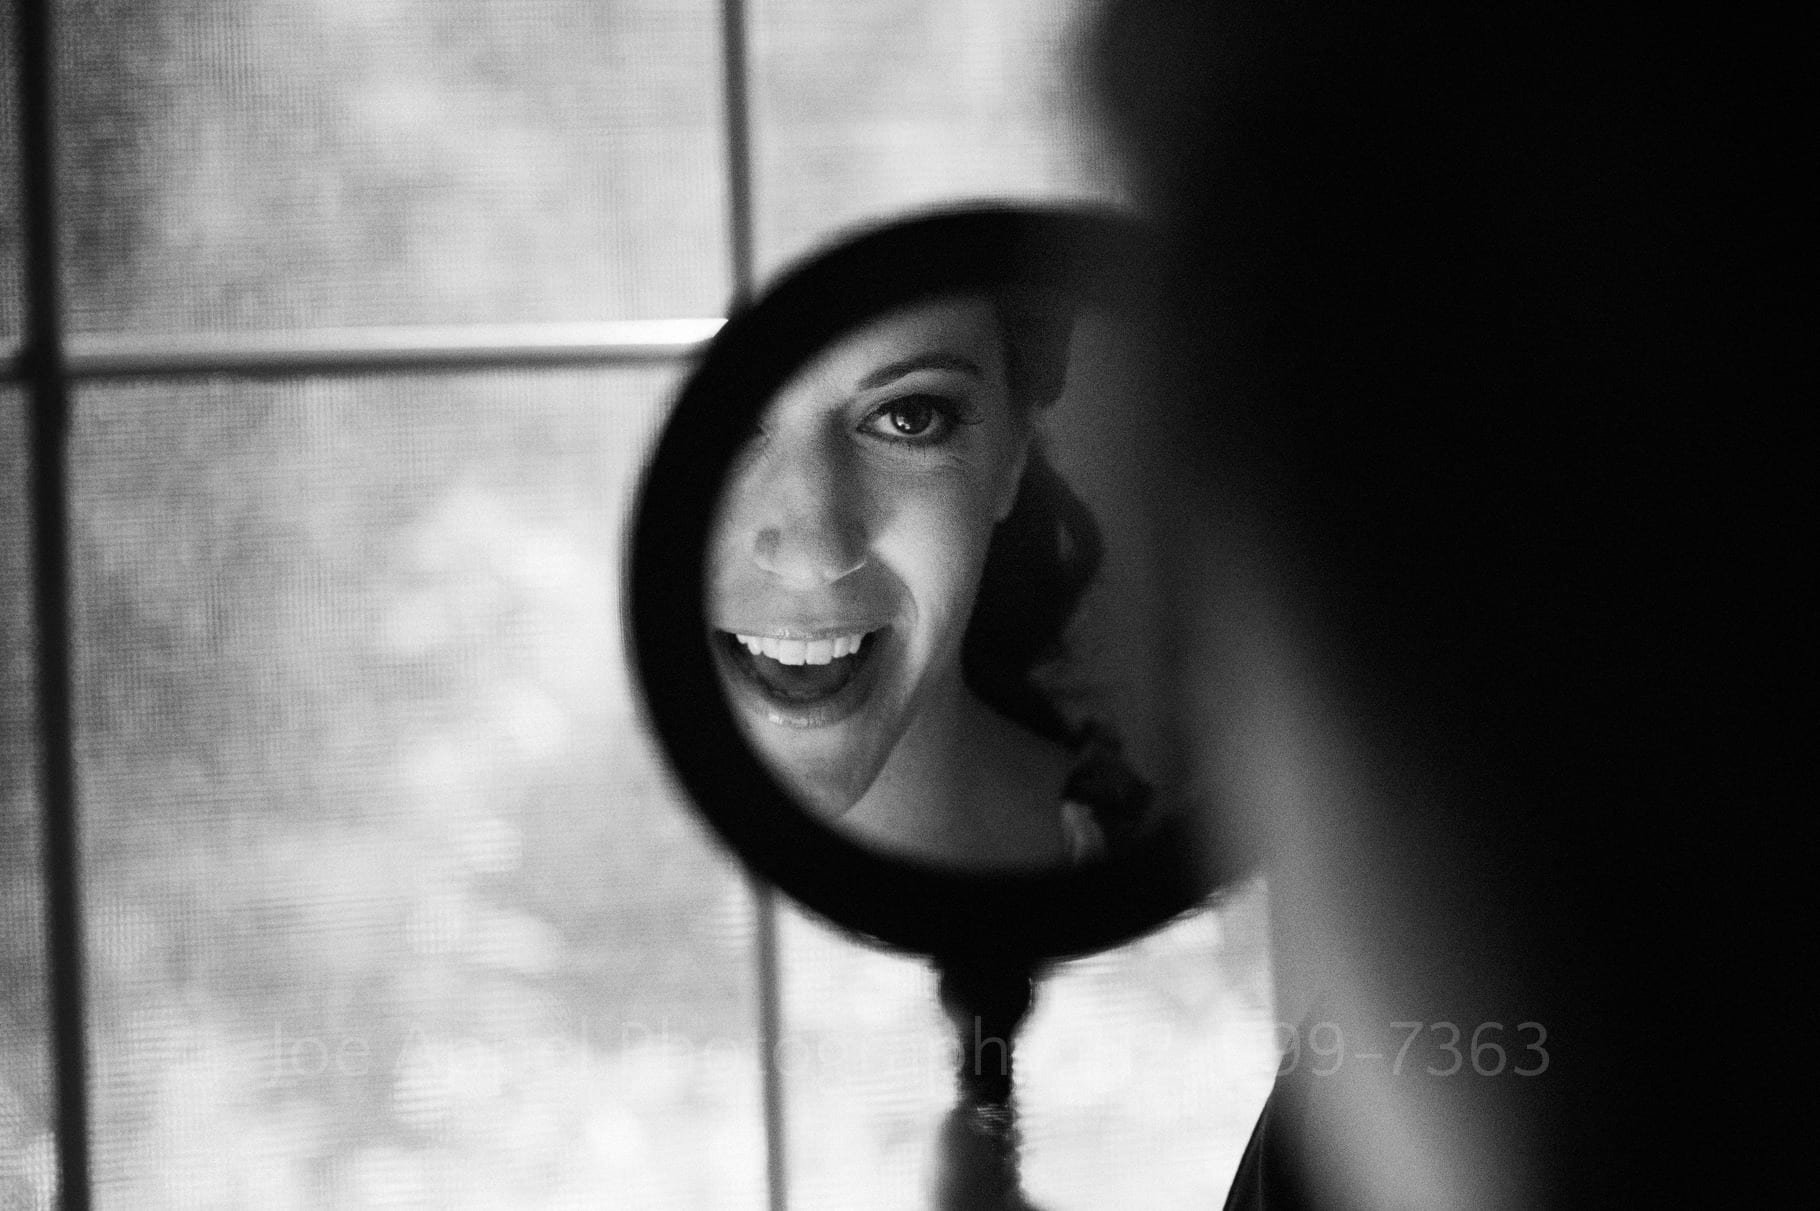 A woman grins as she looks at her reflection in a round mirror in front of a window during their Chanteclaire Farm Wedding.